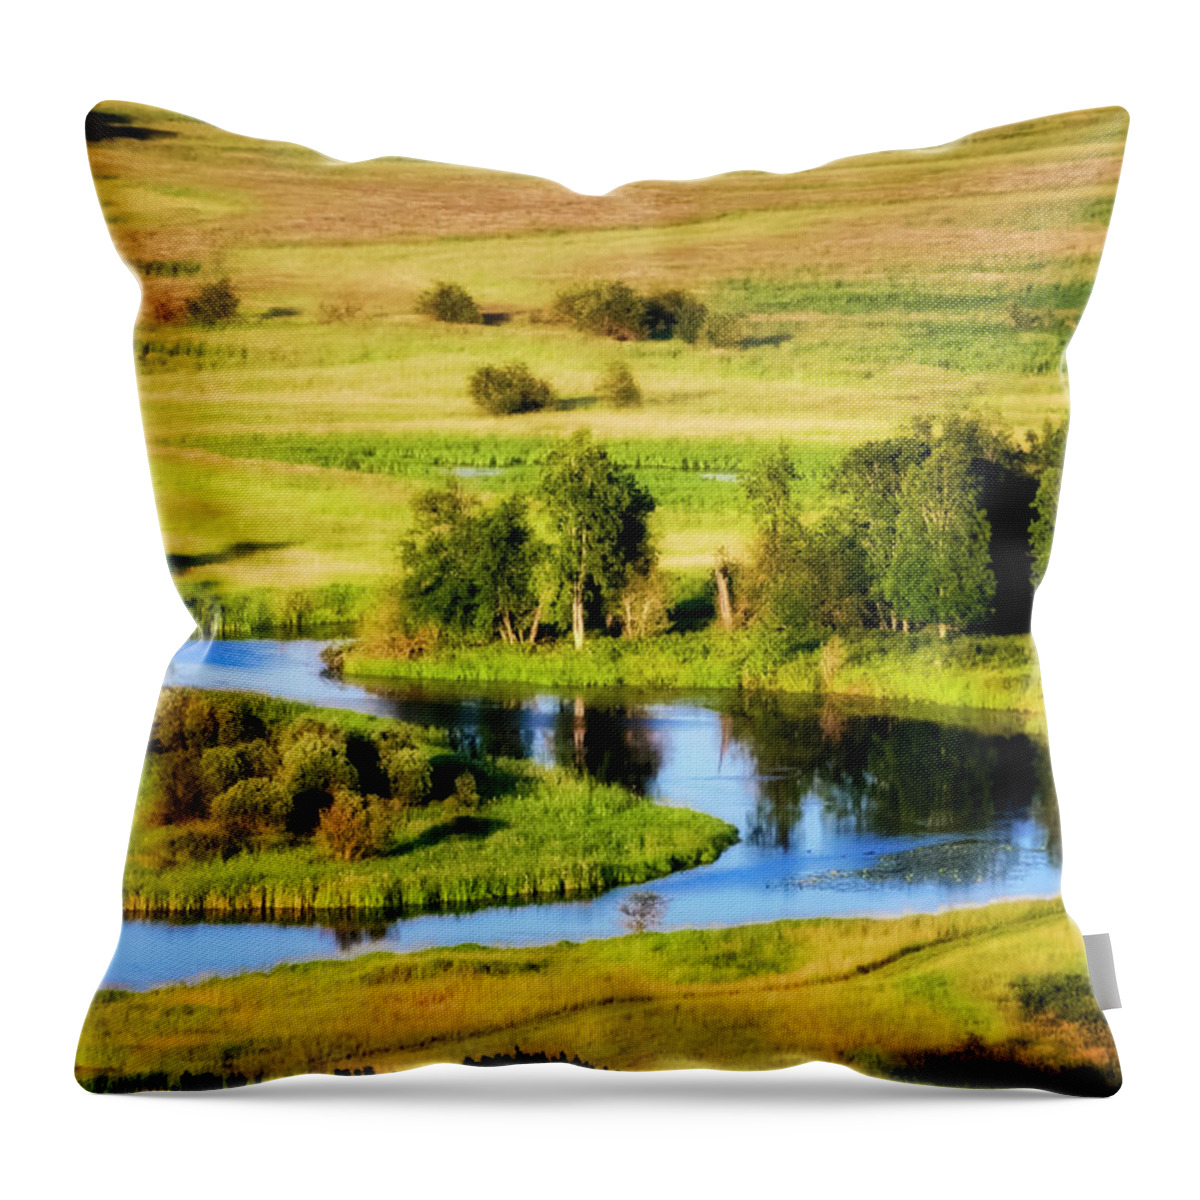 North Idaho Throw Pillow featuring the photograph Clark Fork Delta by Albert Seger